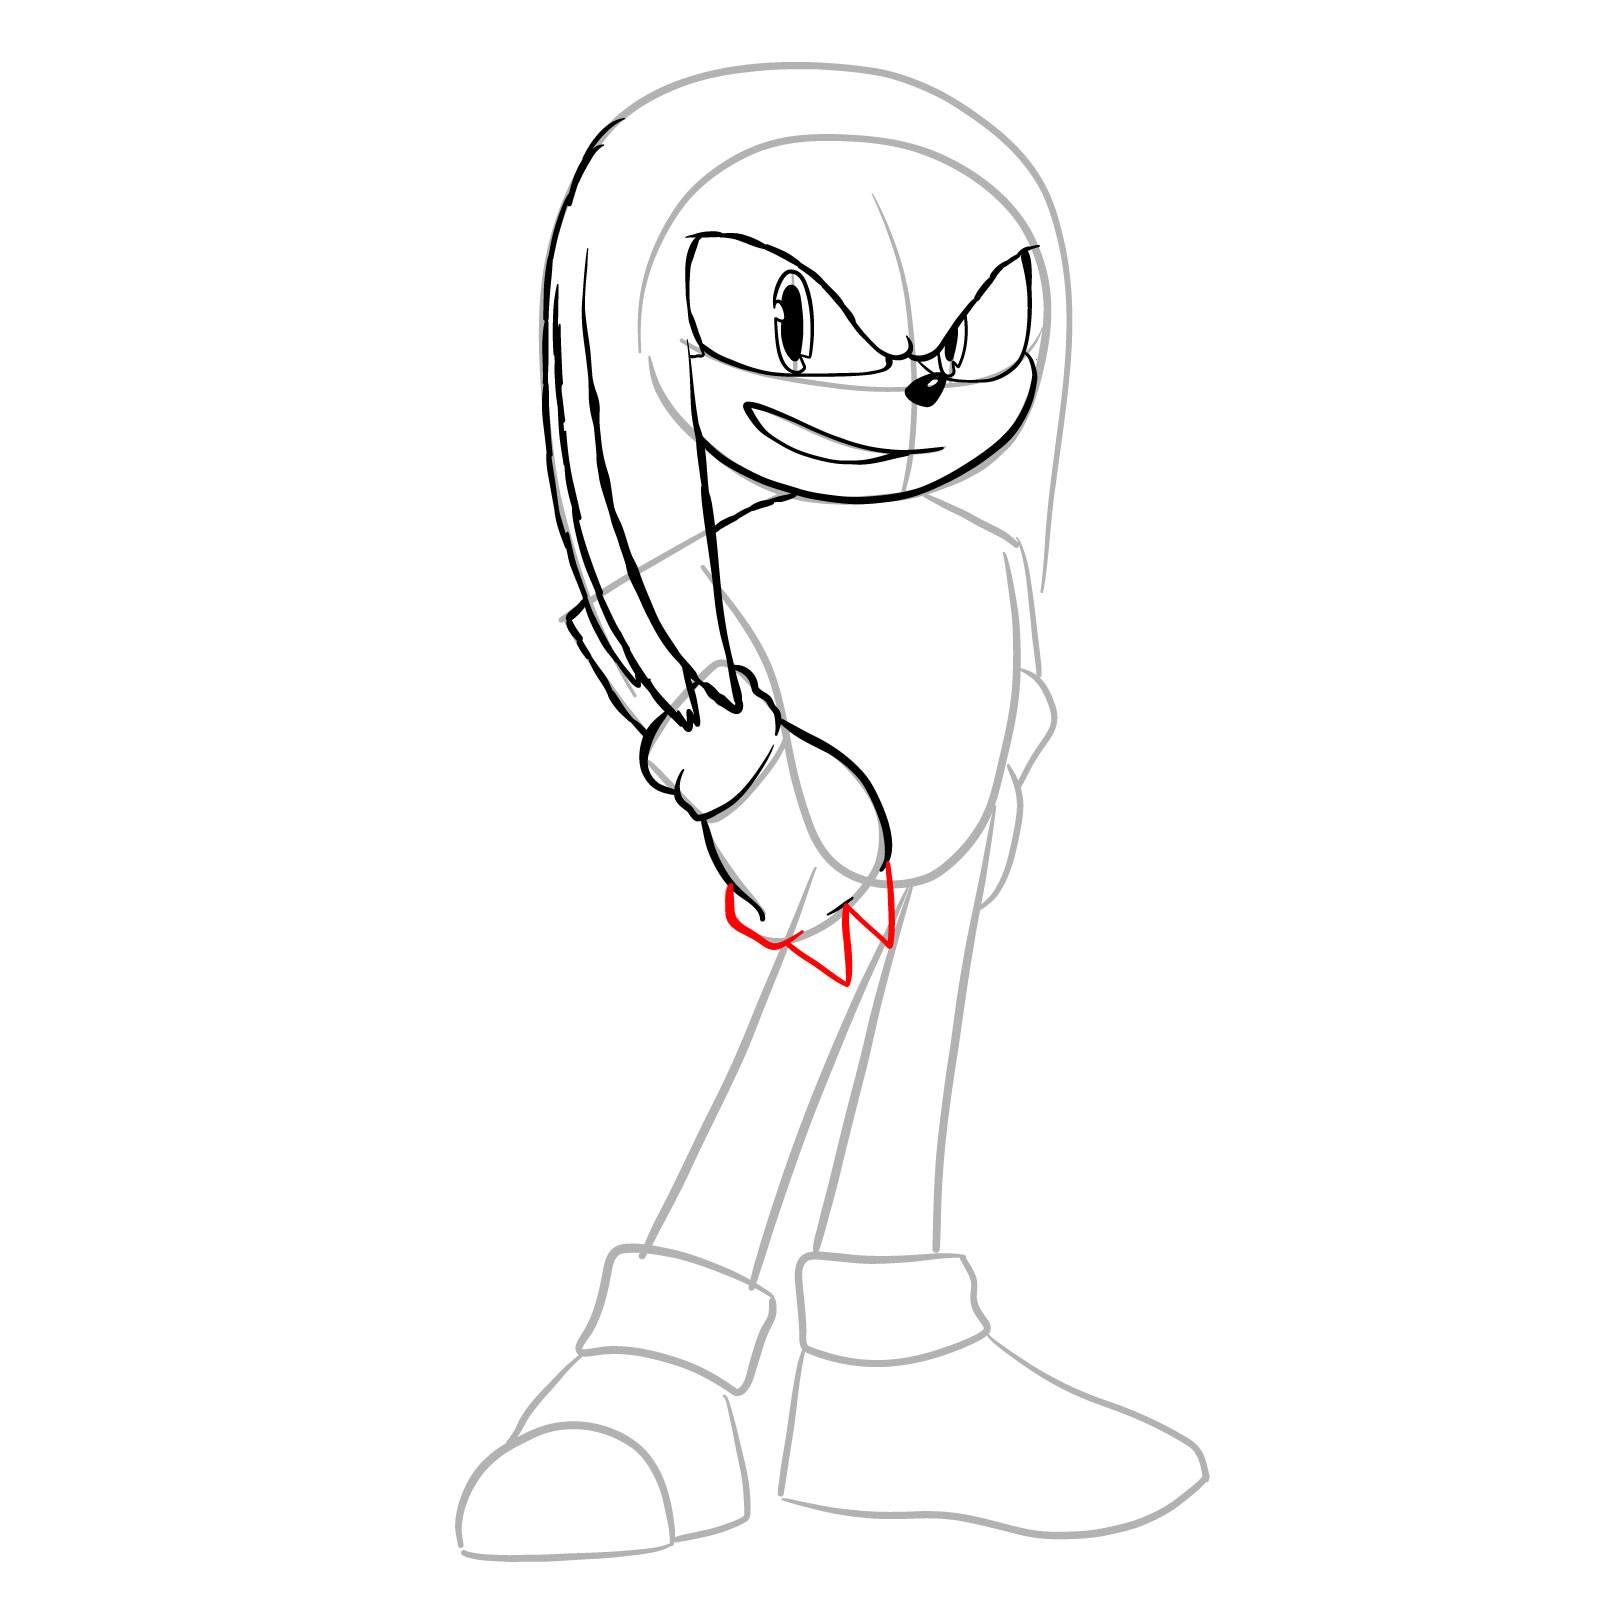 How to draw Knuckles from the movie - step 14